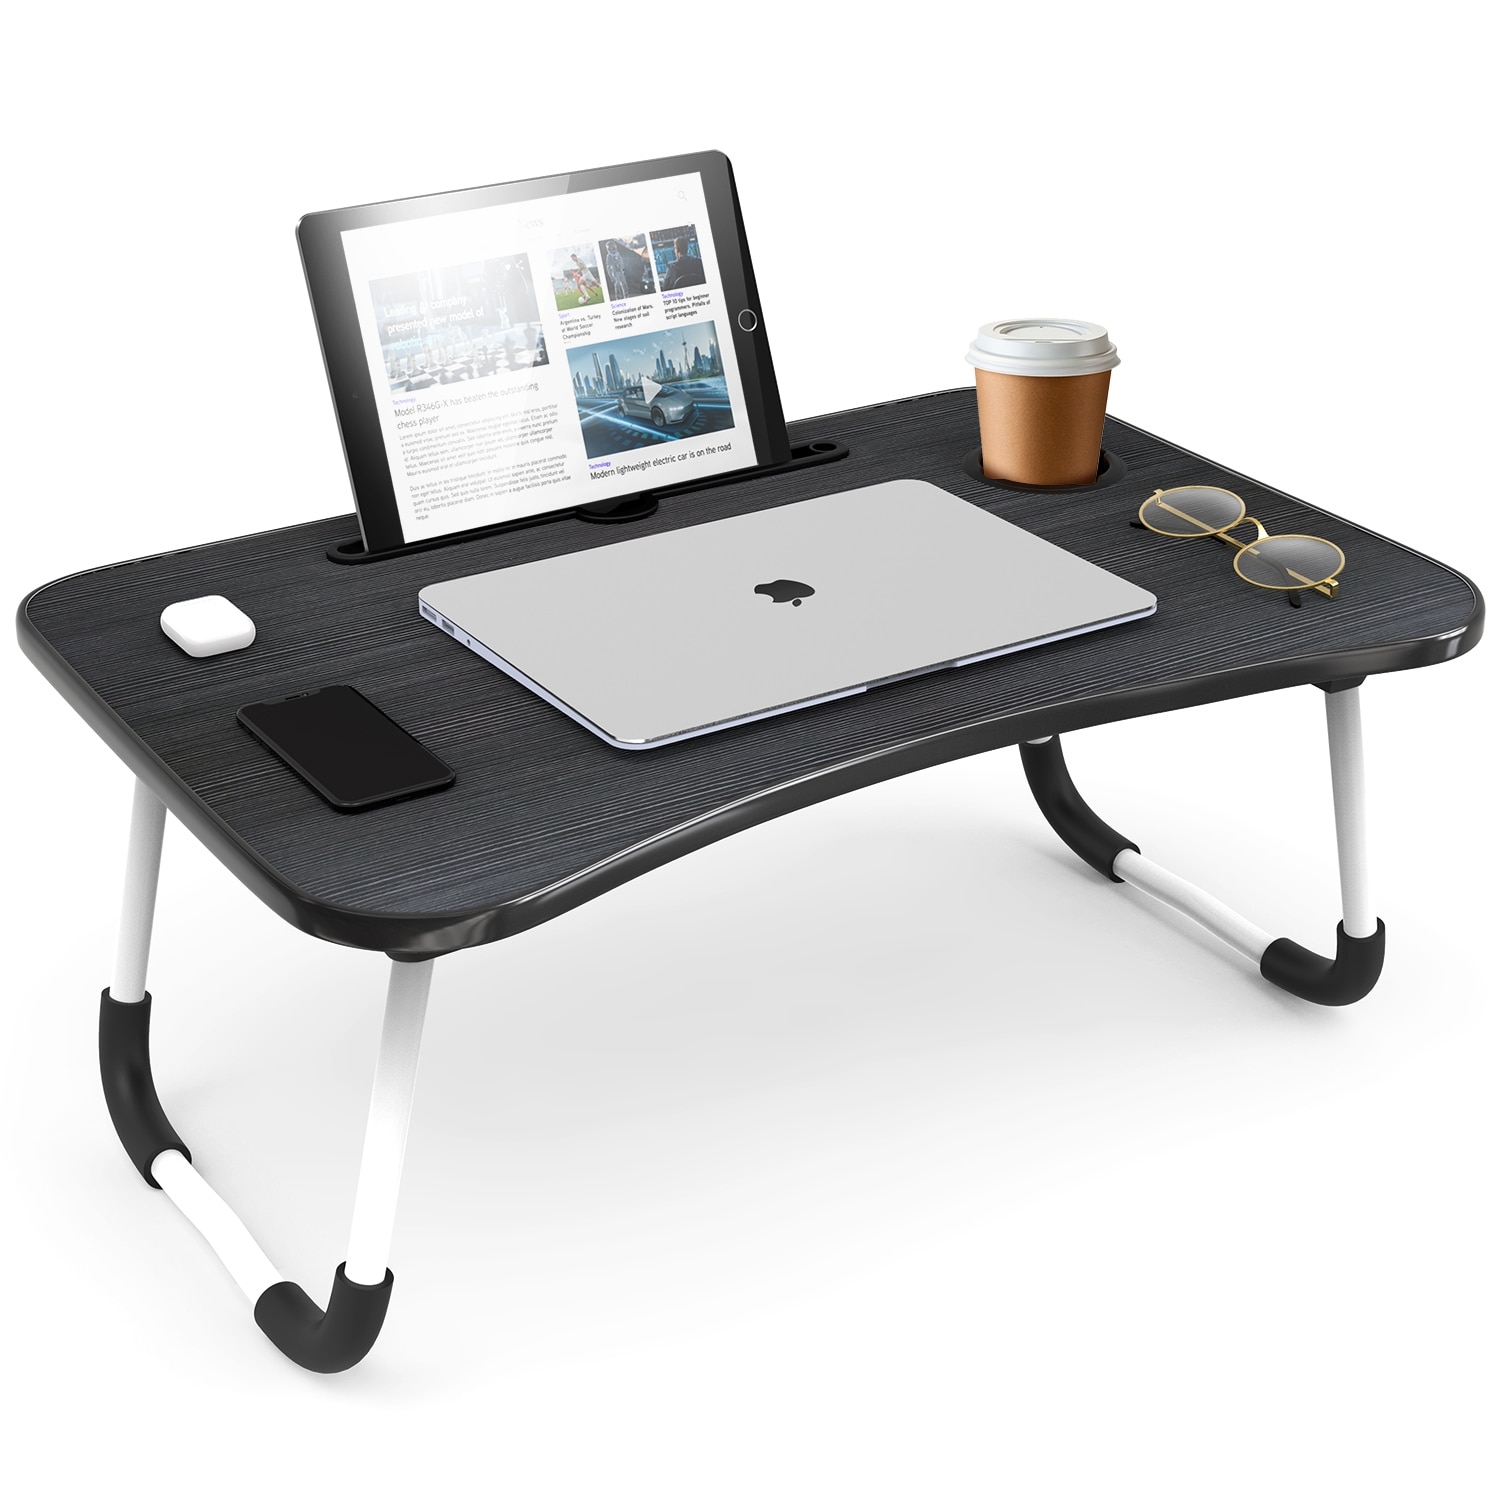 Portable Folding Table Desk TV Tray Laptop Dinner Bed Adjustable Indoor Outdoor 